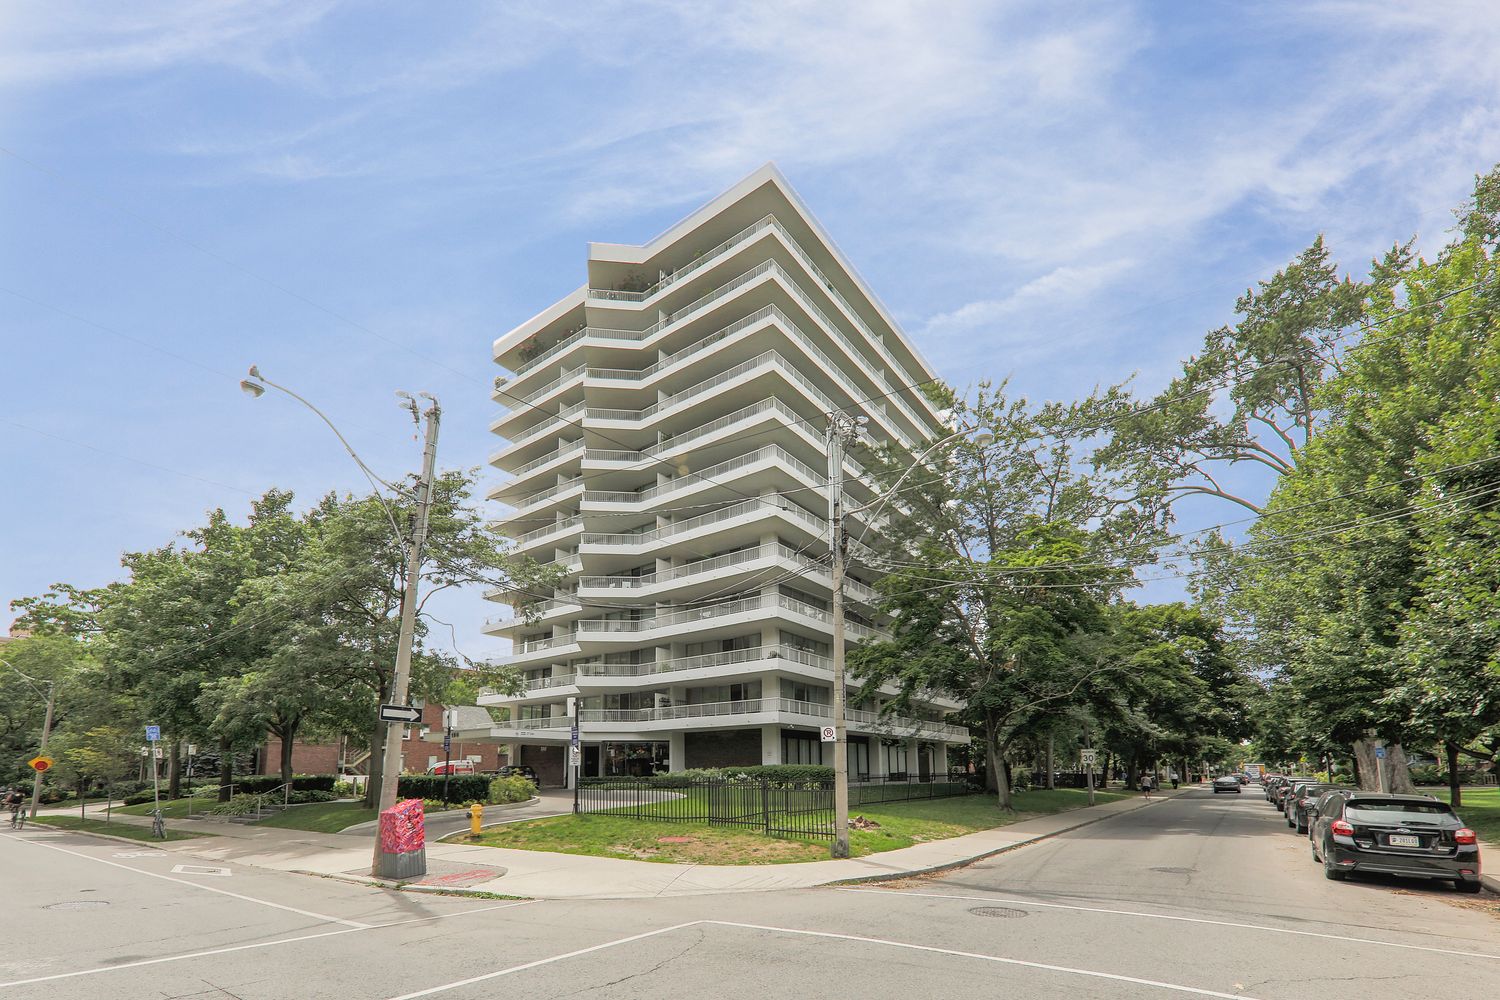 190 St George Street. 190 St George Condos is located in  Downtown, Toronto - image #1 of 4